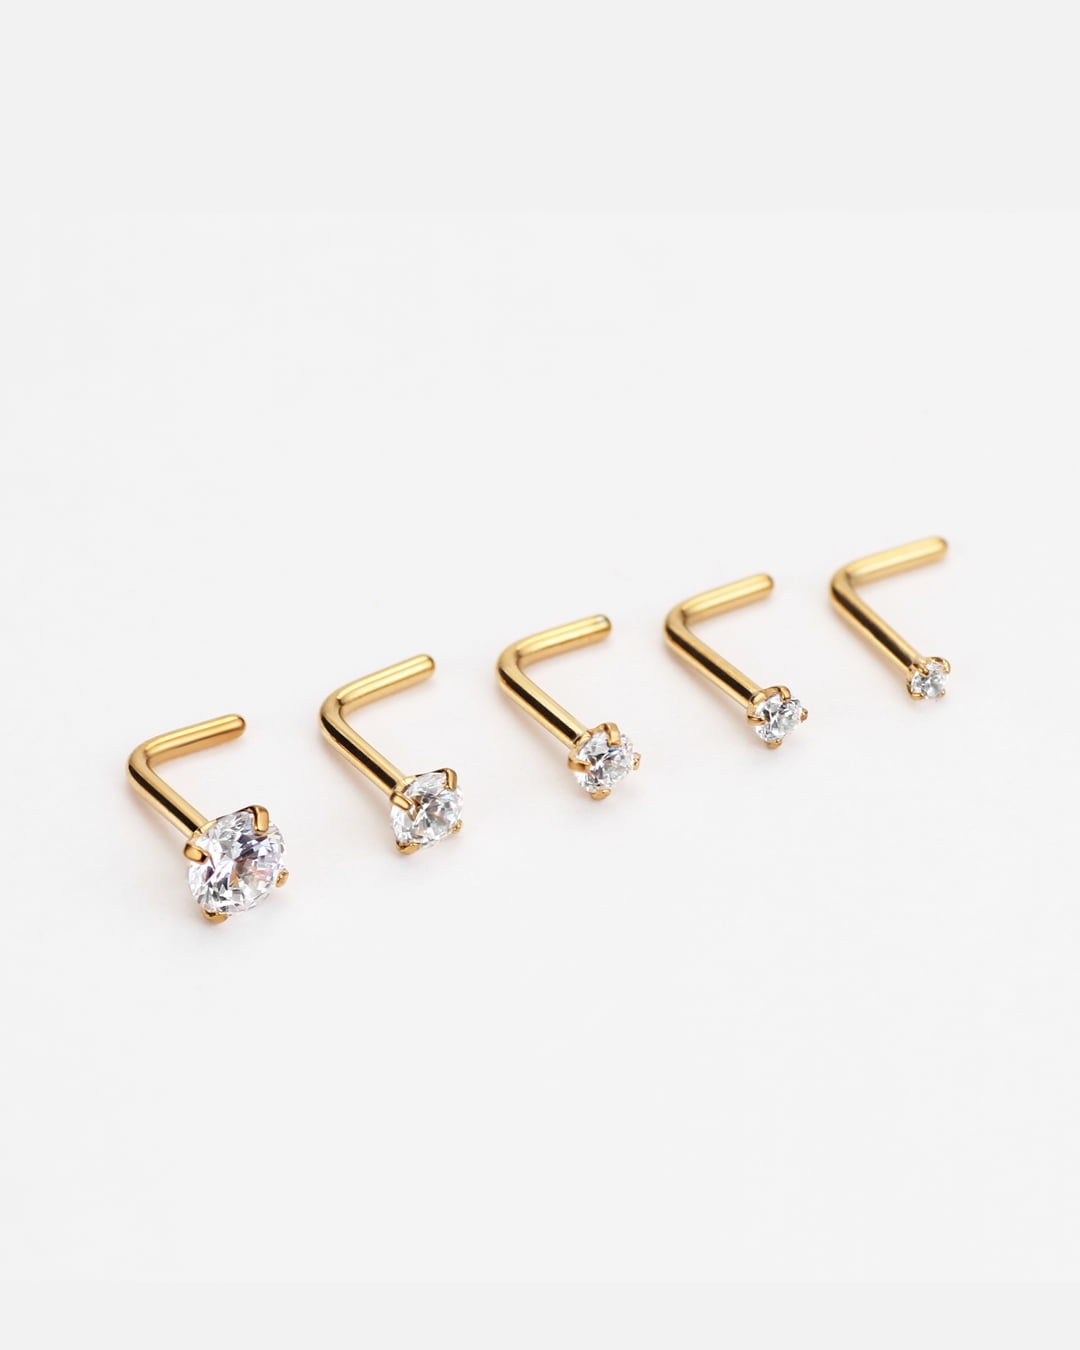 Buy Stylish 40 Pcs Stainless Steel Nose Ring Studs Pins Body Piercing Nose  Stud 1.5Mm 2Mm 2.5Mm 3Mm -Nose Pin For Women Online In India At Discounted  Prices